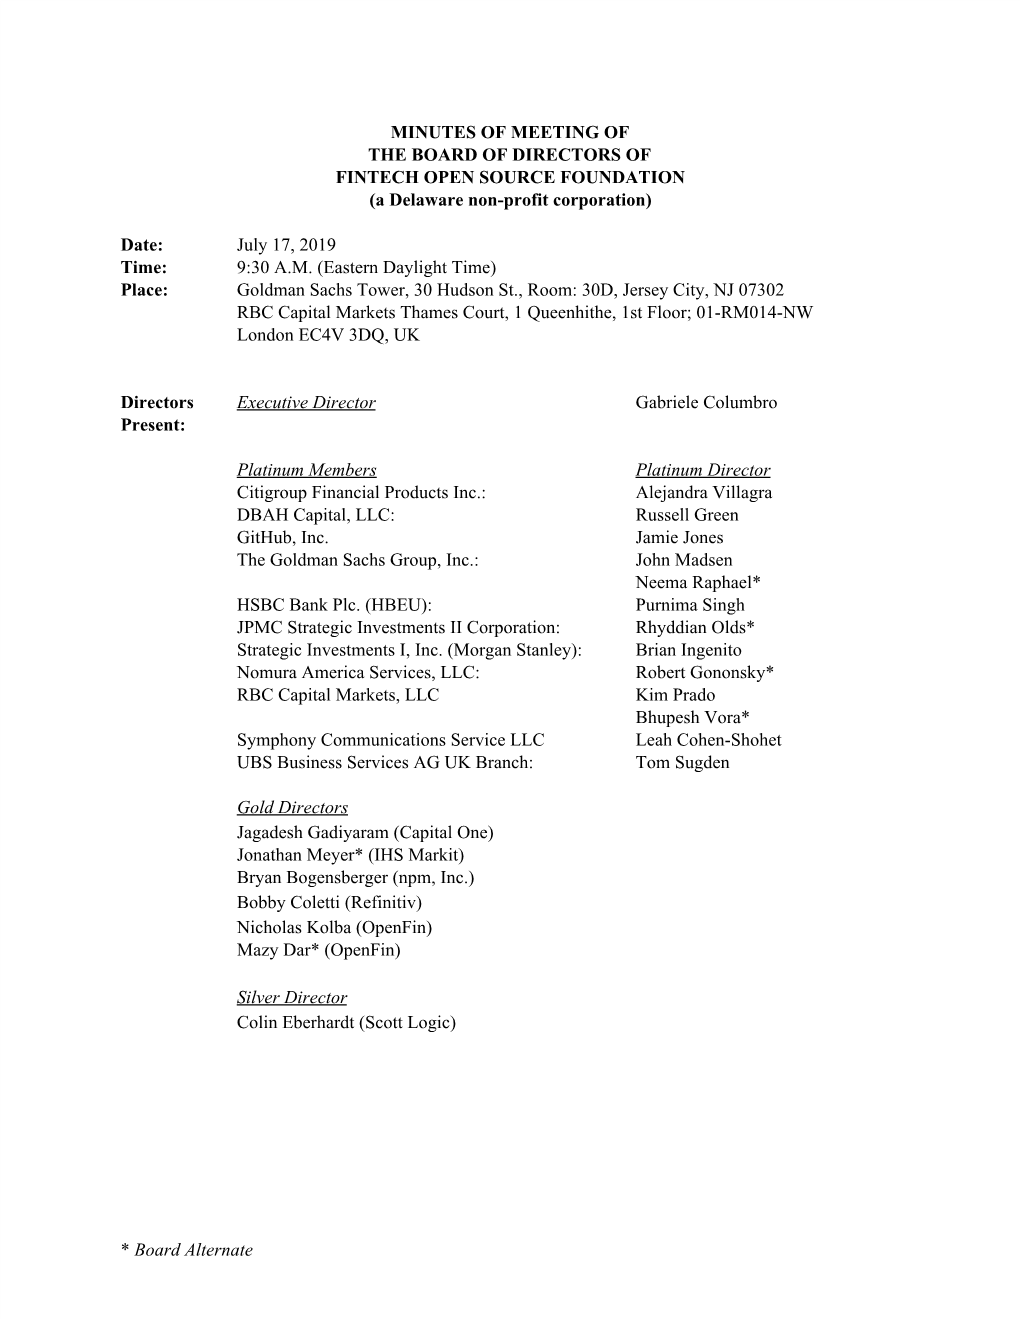 MINUTES of MEETING of the BOARD of DIRECTORS of FINTECH OPEN SOURCE FOUNDATION (A Delaware Non-Profit Corporation) Date: July 17